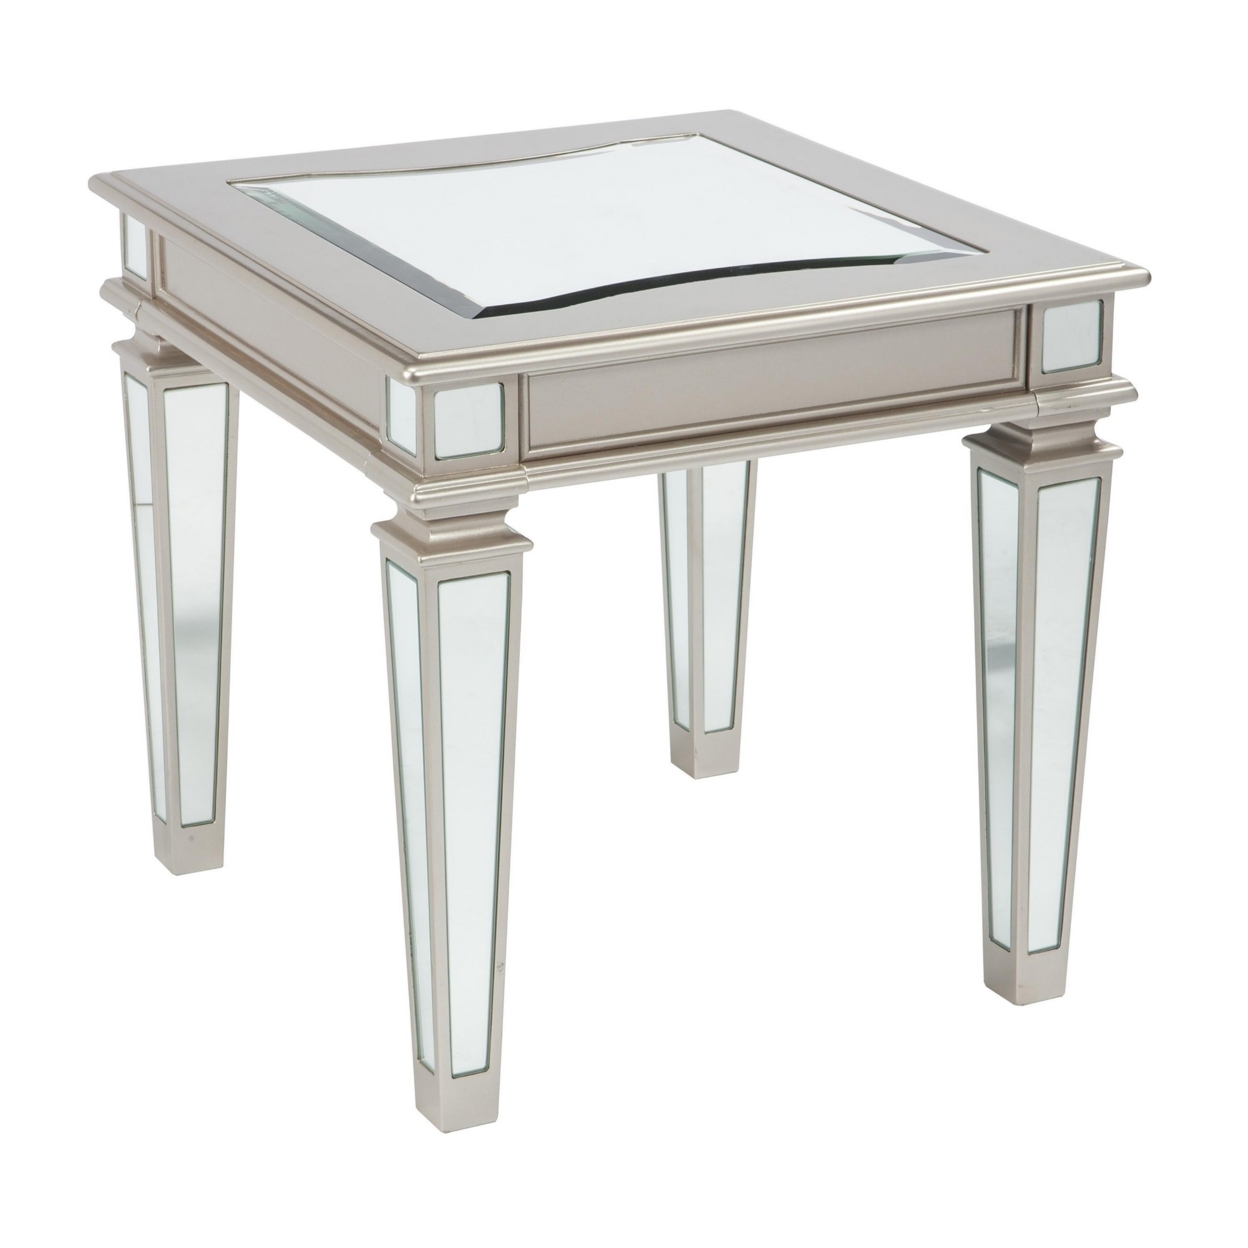 Wooden End Table With Mirror Top And Tapered Legs,Champagne Gold And Silver- Saltoro Sherpi